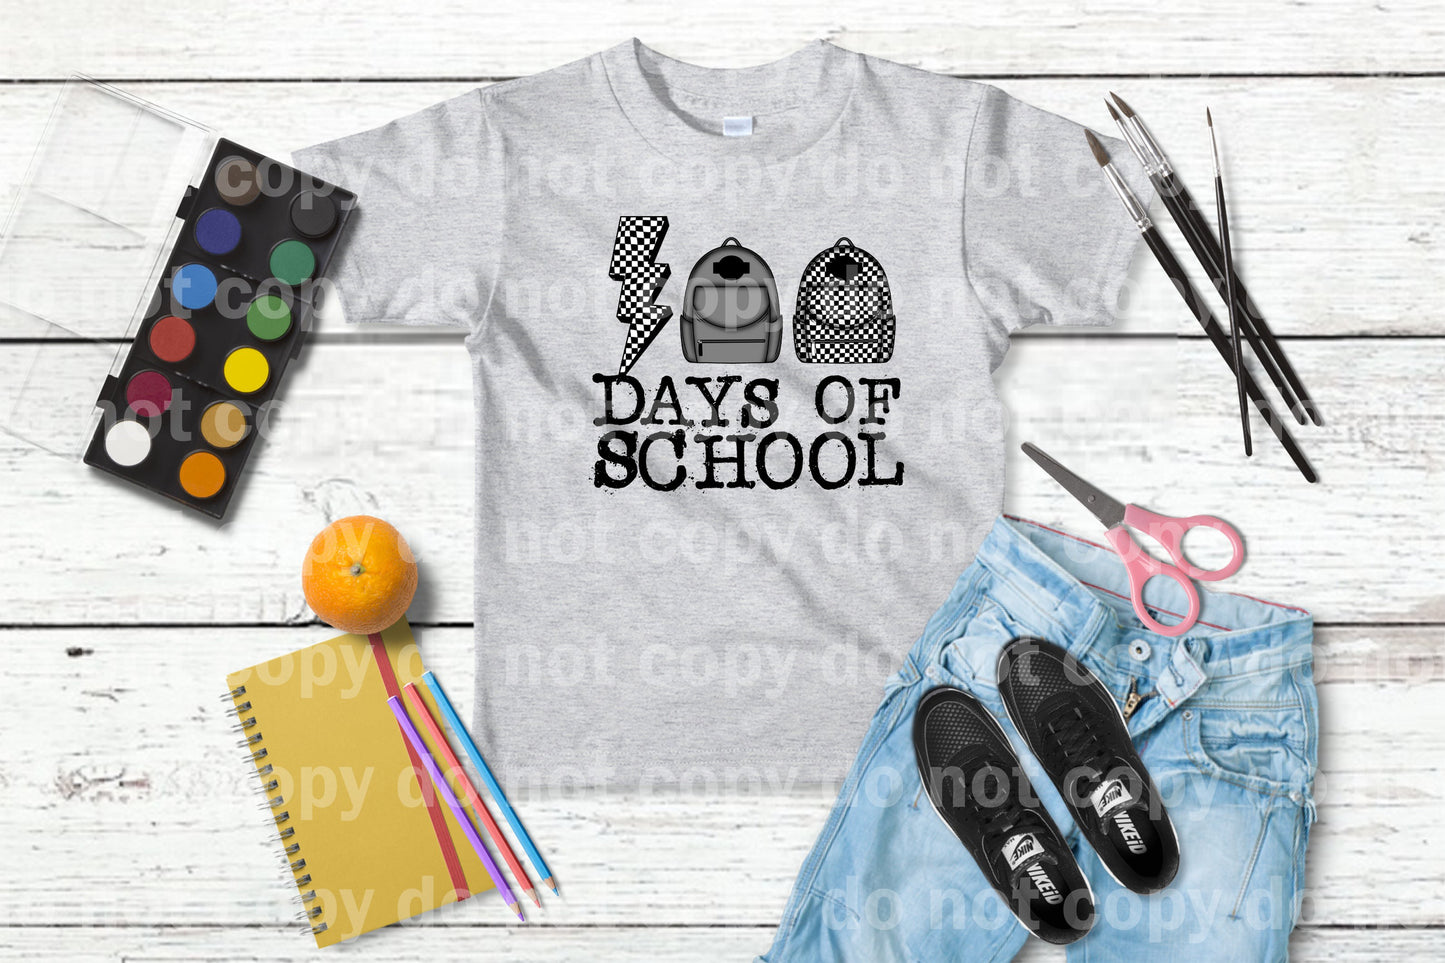 100 Days of School Dream Print or Sublimation Print